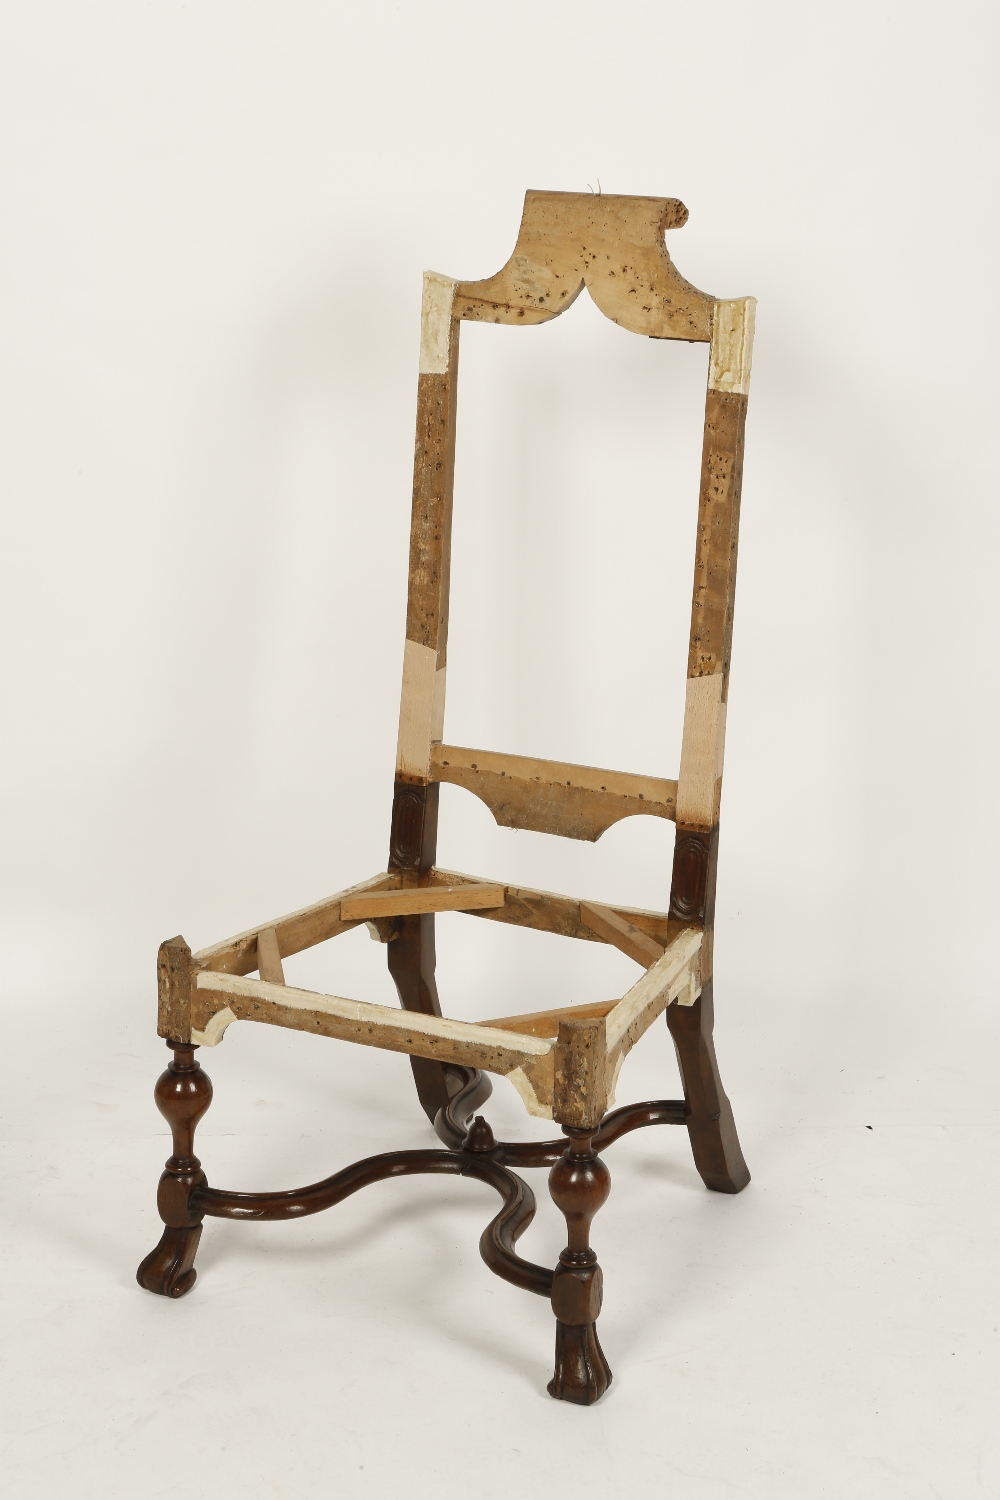 A QUEEN ANNE WALNUT HIGH-BACKED CHAIR FRAME, with a scrolling top rail above an open back and